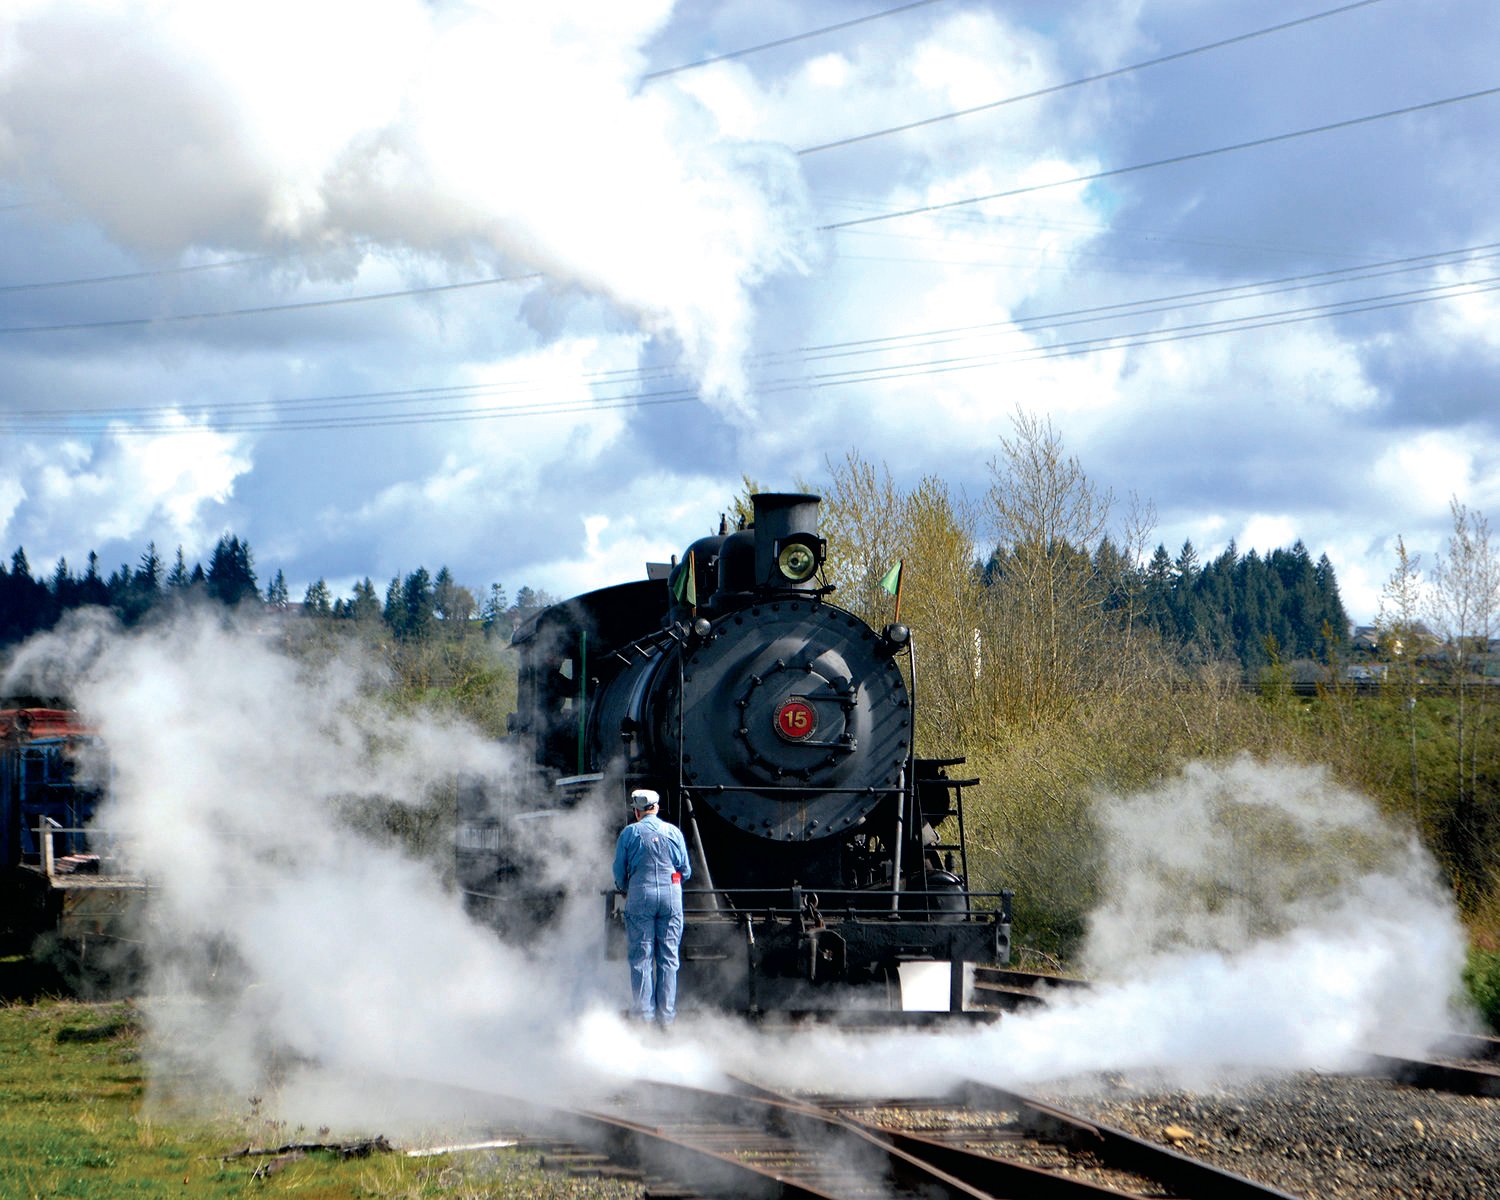 Jack Eppert rides on the front of a steam train at the Chehalis-Centralia Railroad Museum in this 2017 file photo.